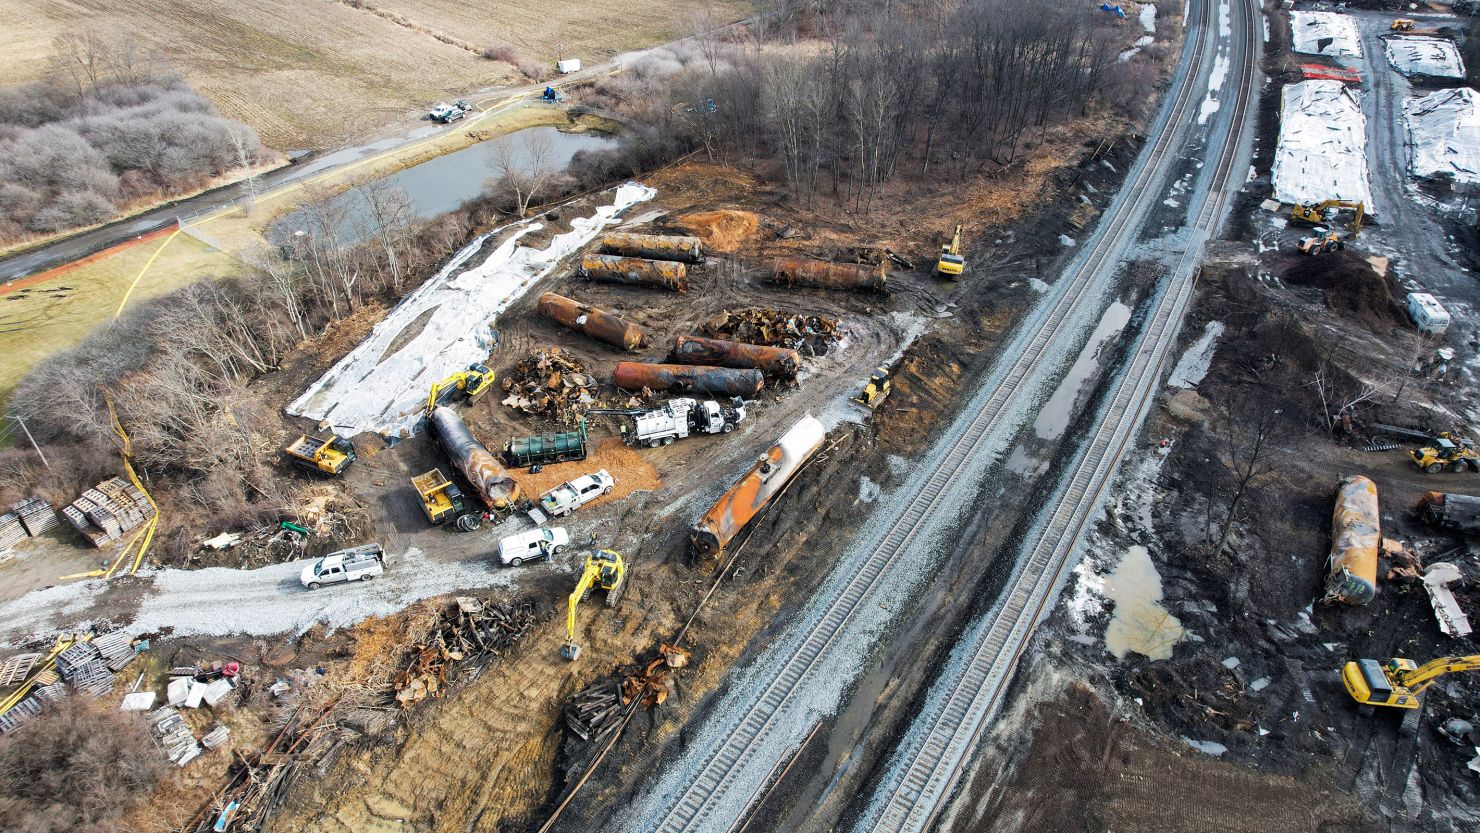 An aerial view of the site of the Norfolk Southern train derailment of a train carrying hazardous chemicals in East Palestine, Ohio, in February 2023.